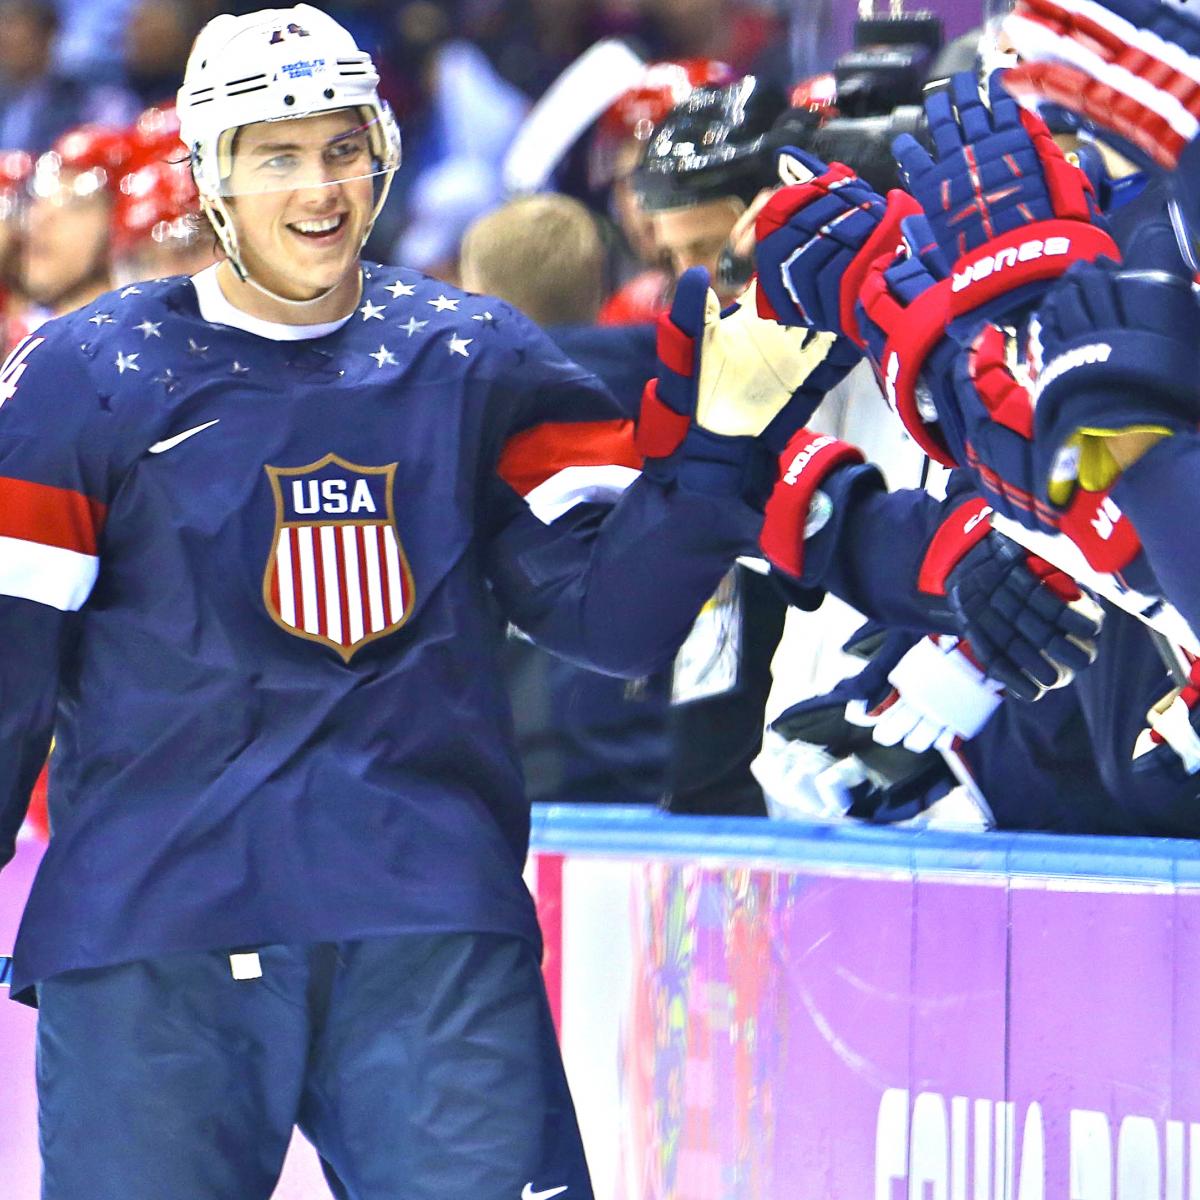 10 things to know about hockey hero T.J. Oshie